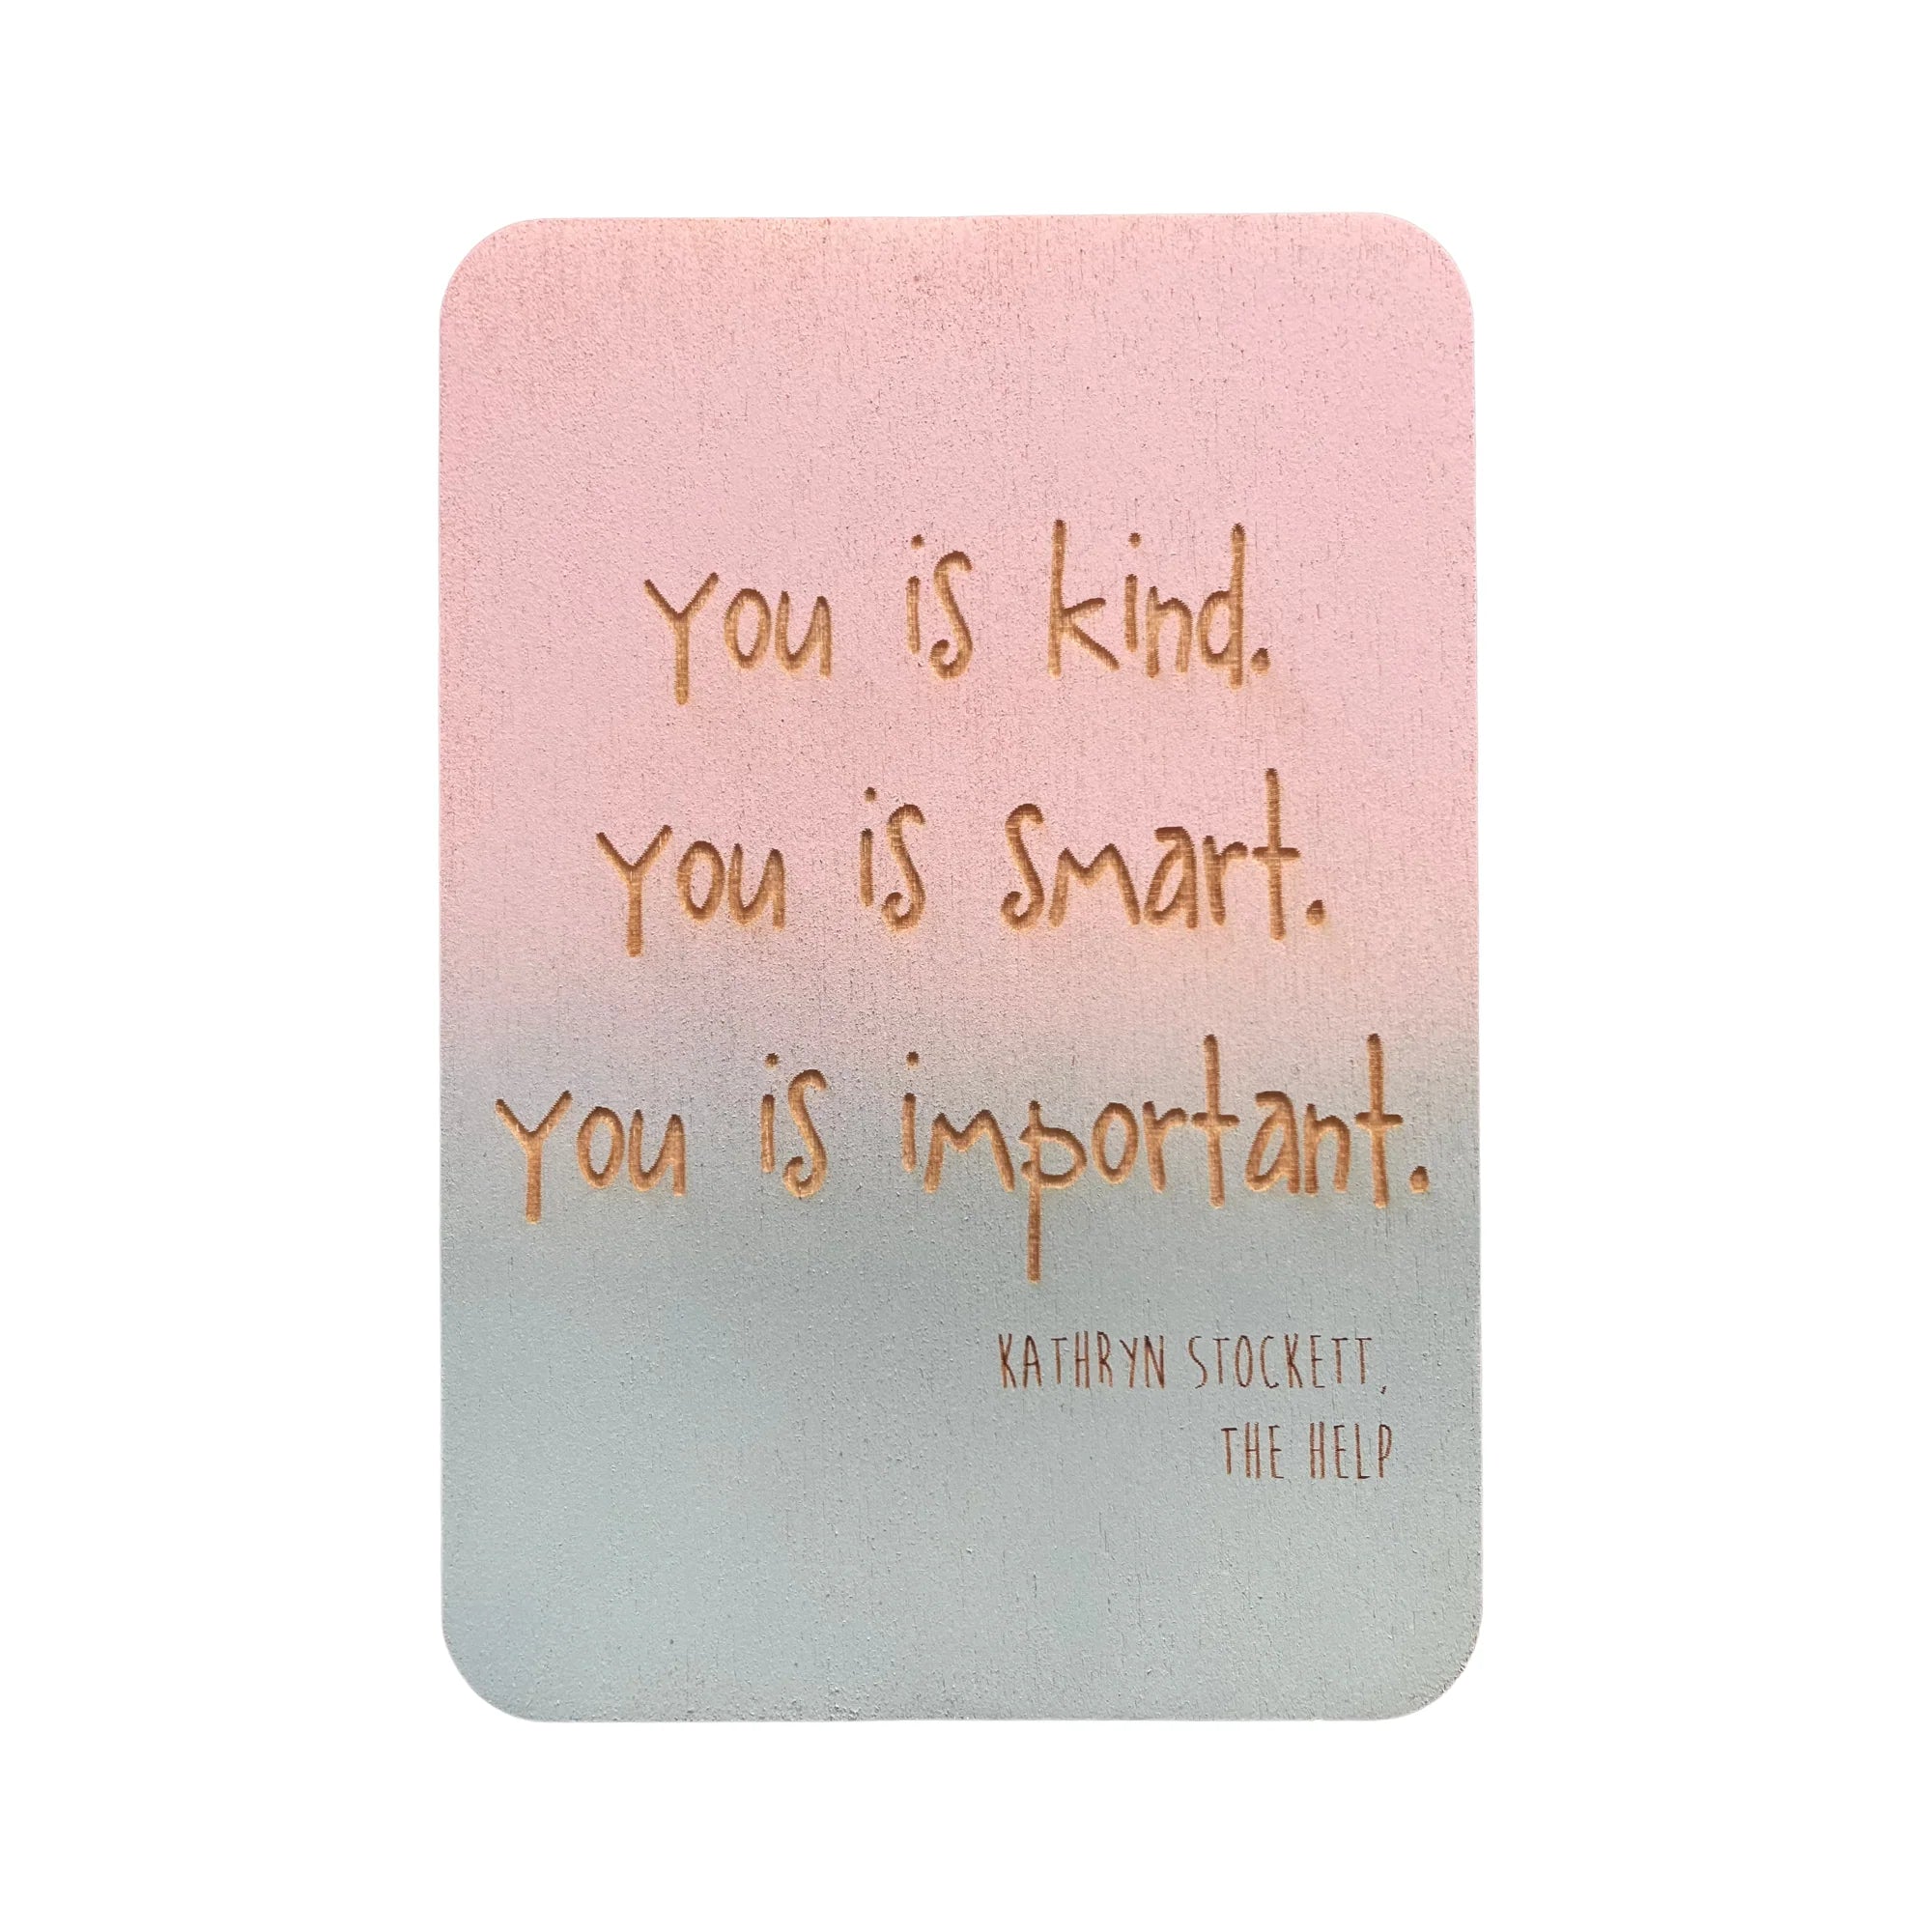 You is Kind. You is Smart. You is Important. _ Luna & Soul Australia